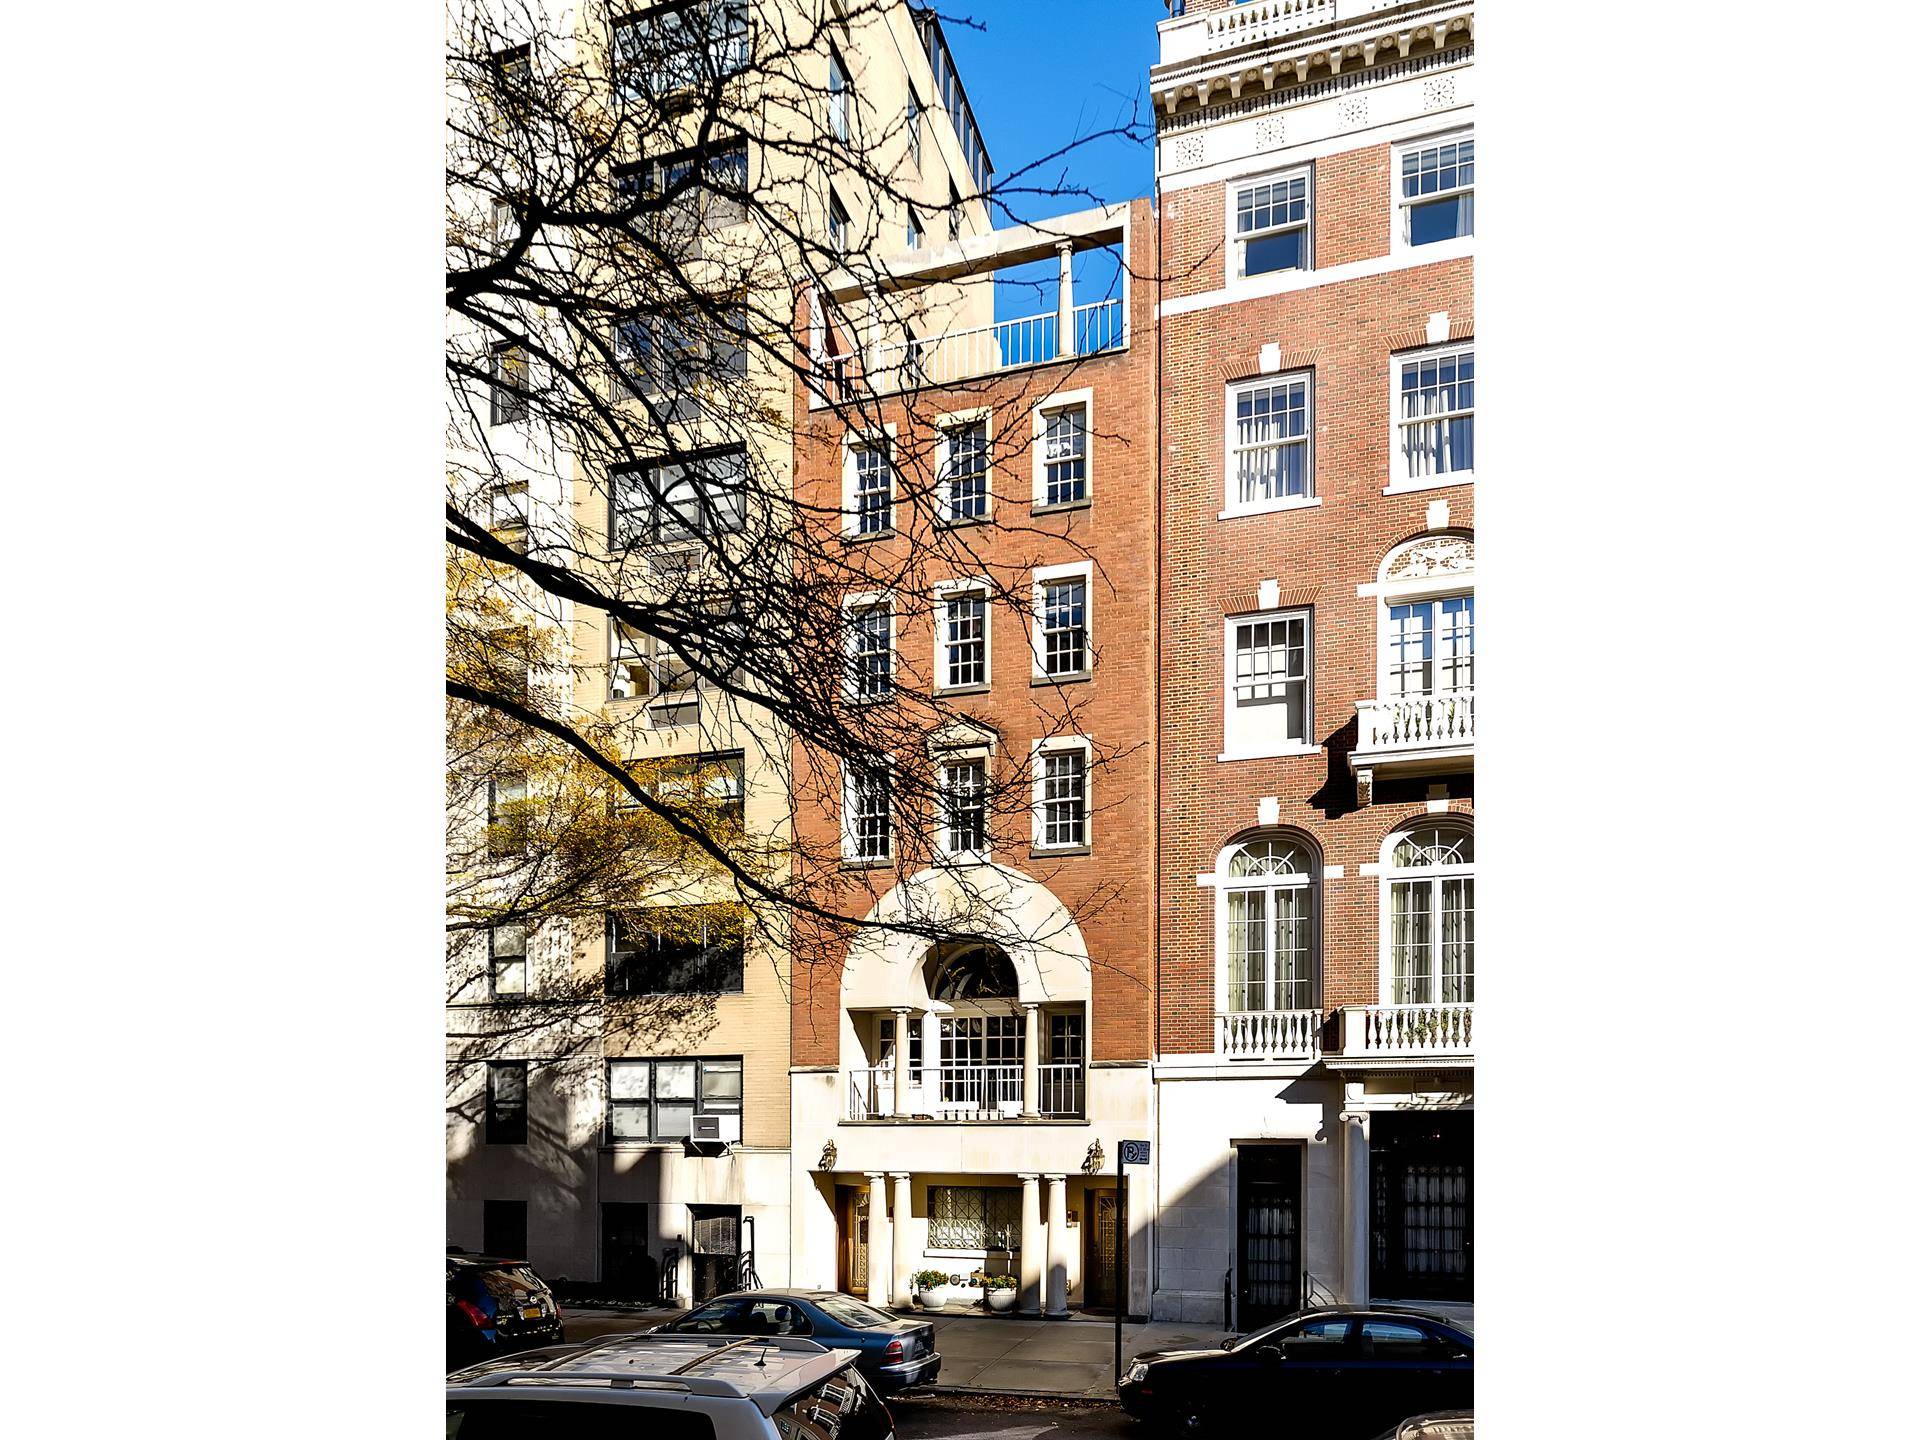 Located on one of the most coveted blocks on the Upper East Side, just a few feet away from Central Park, this beautiful six story single family residence features 6 ...